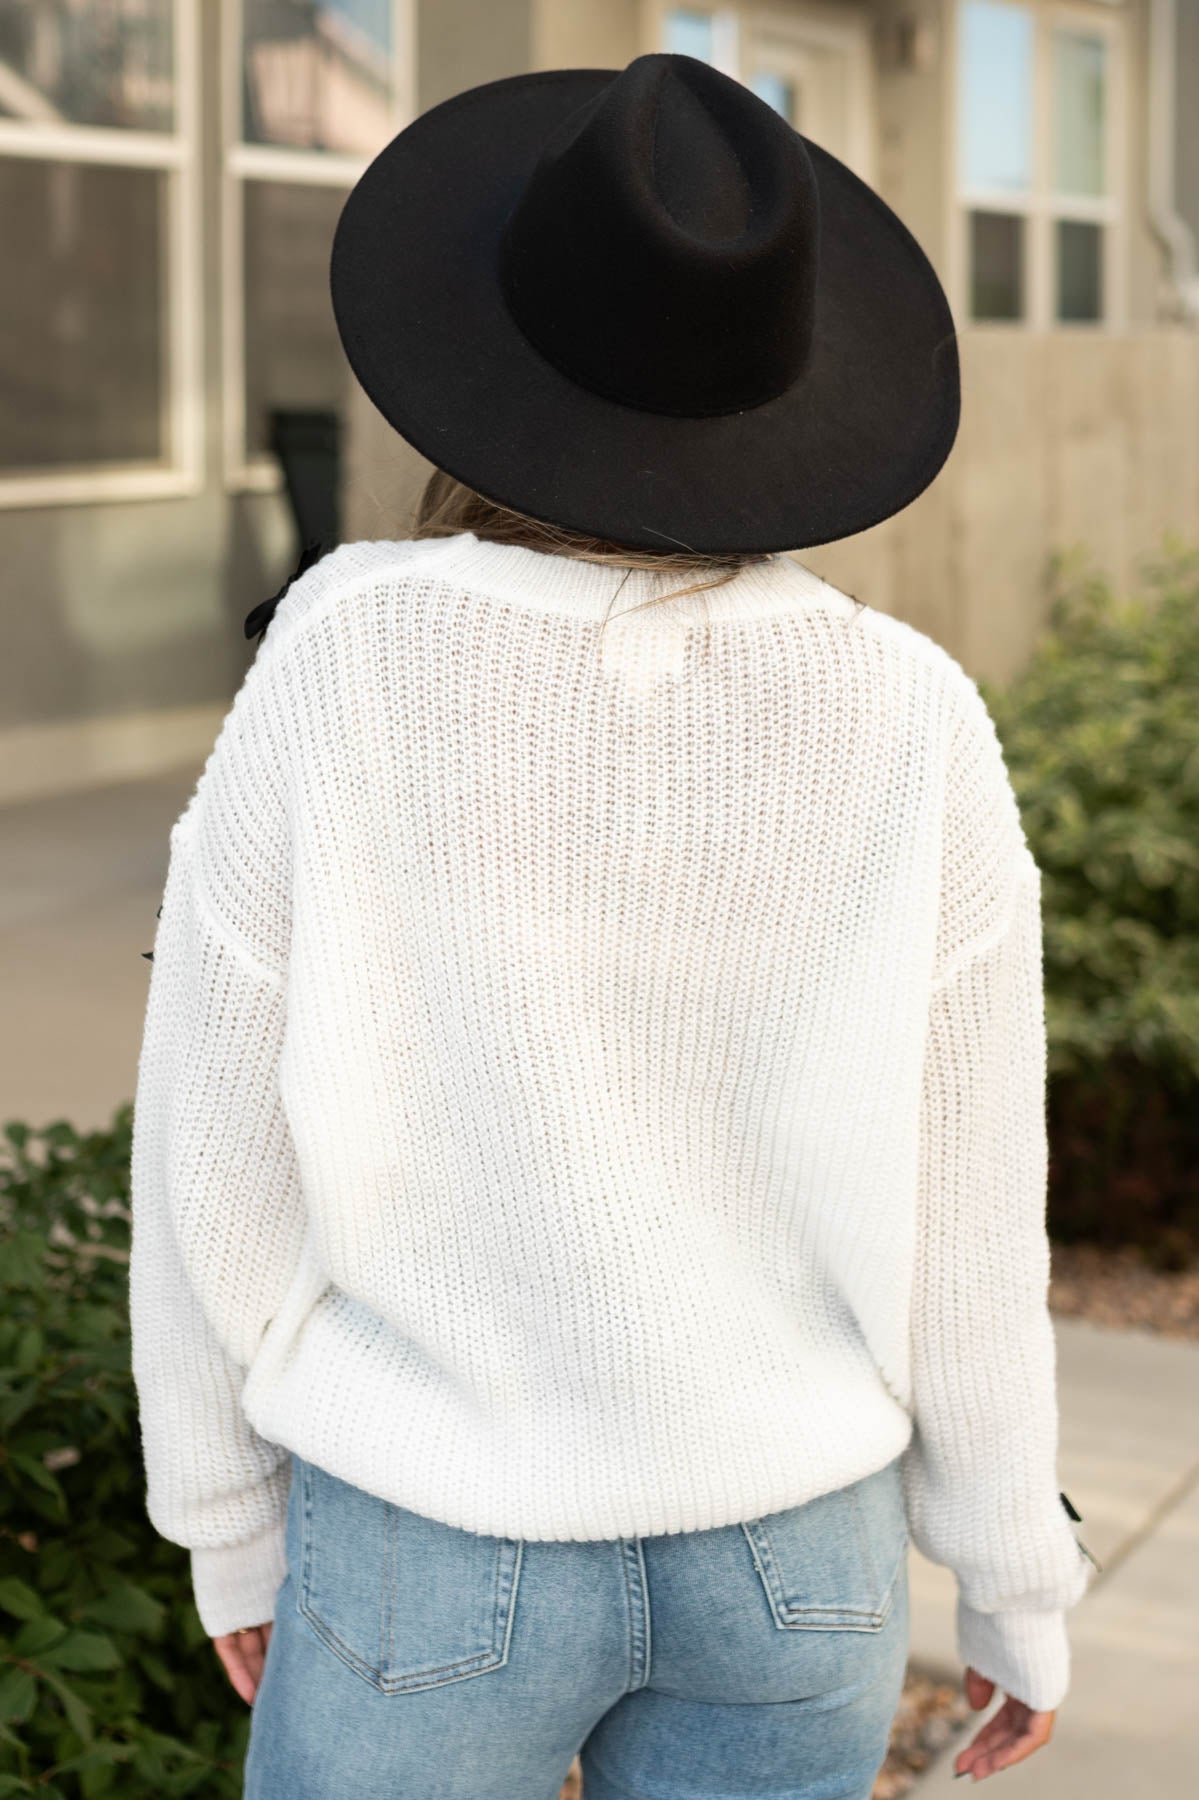 Back view of a white sweater